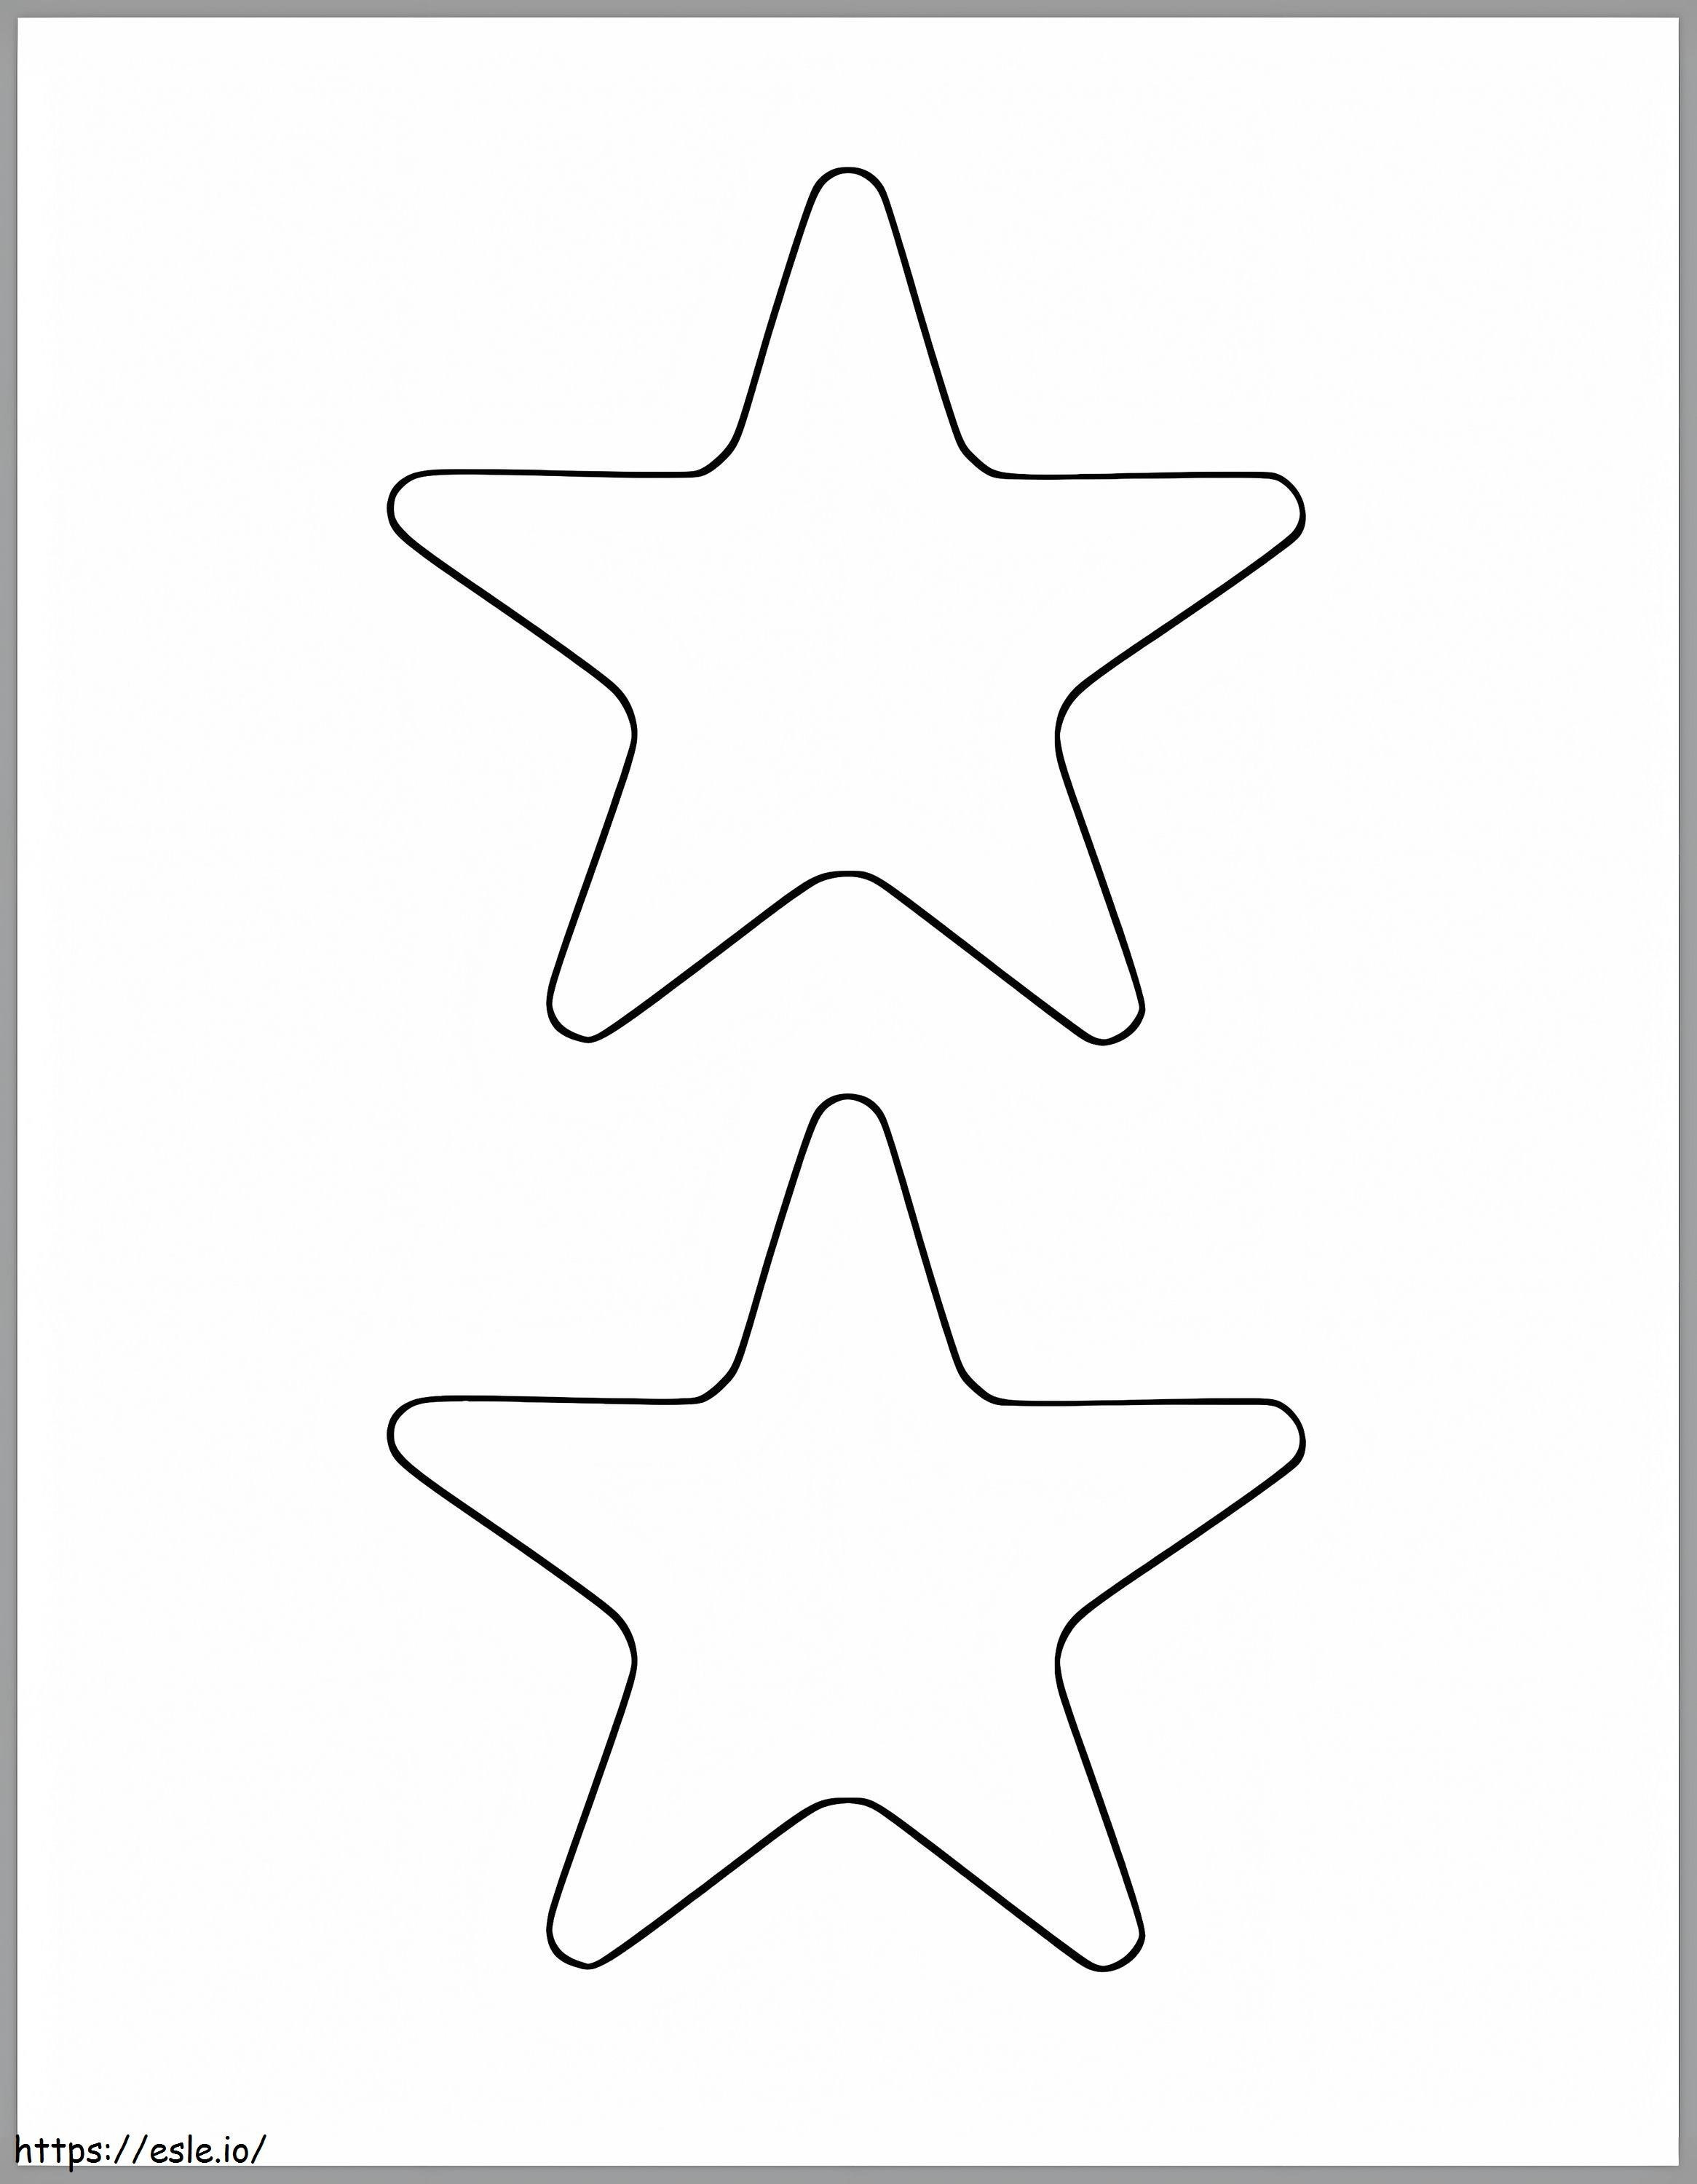 Two Stars coloring page